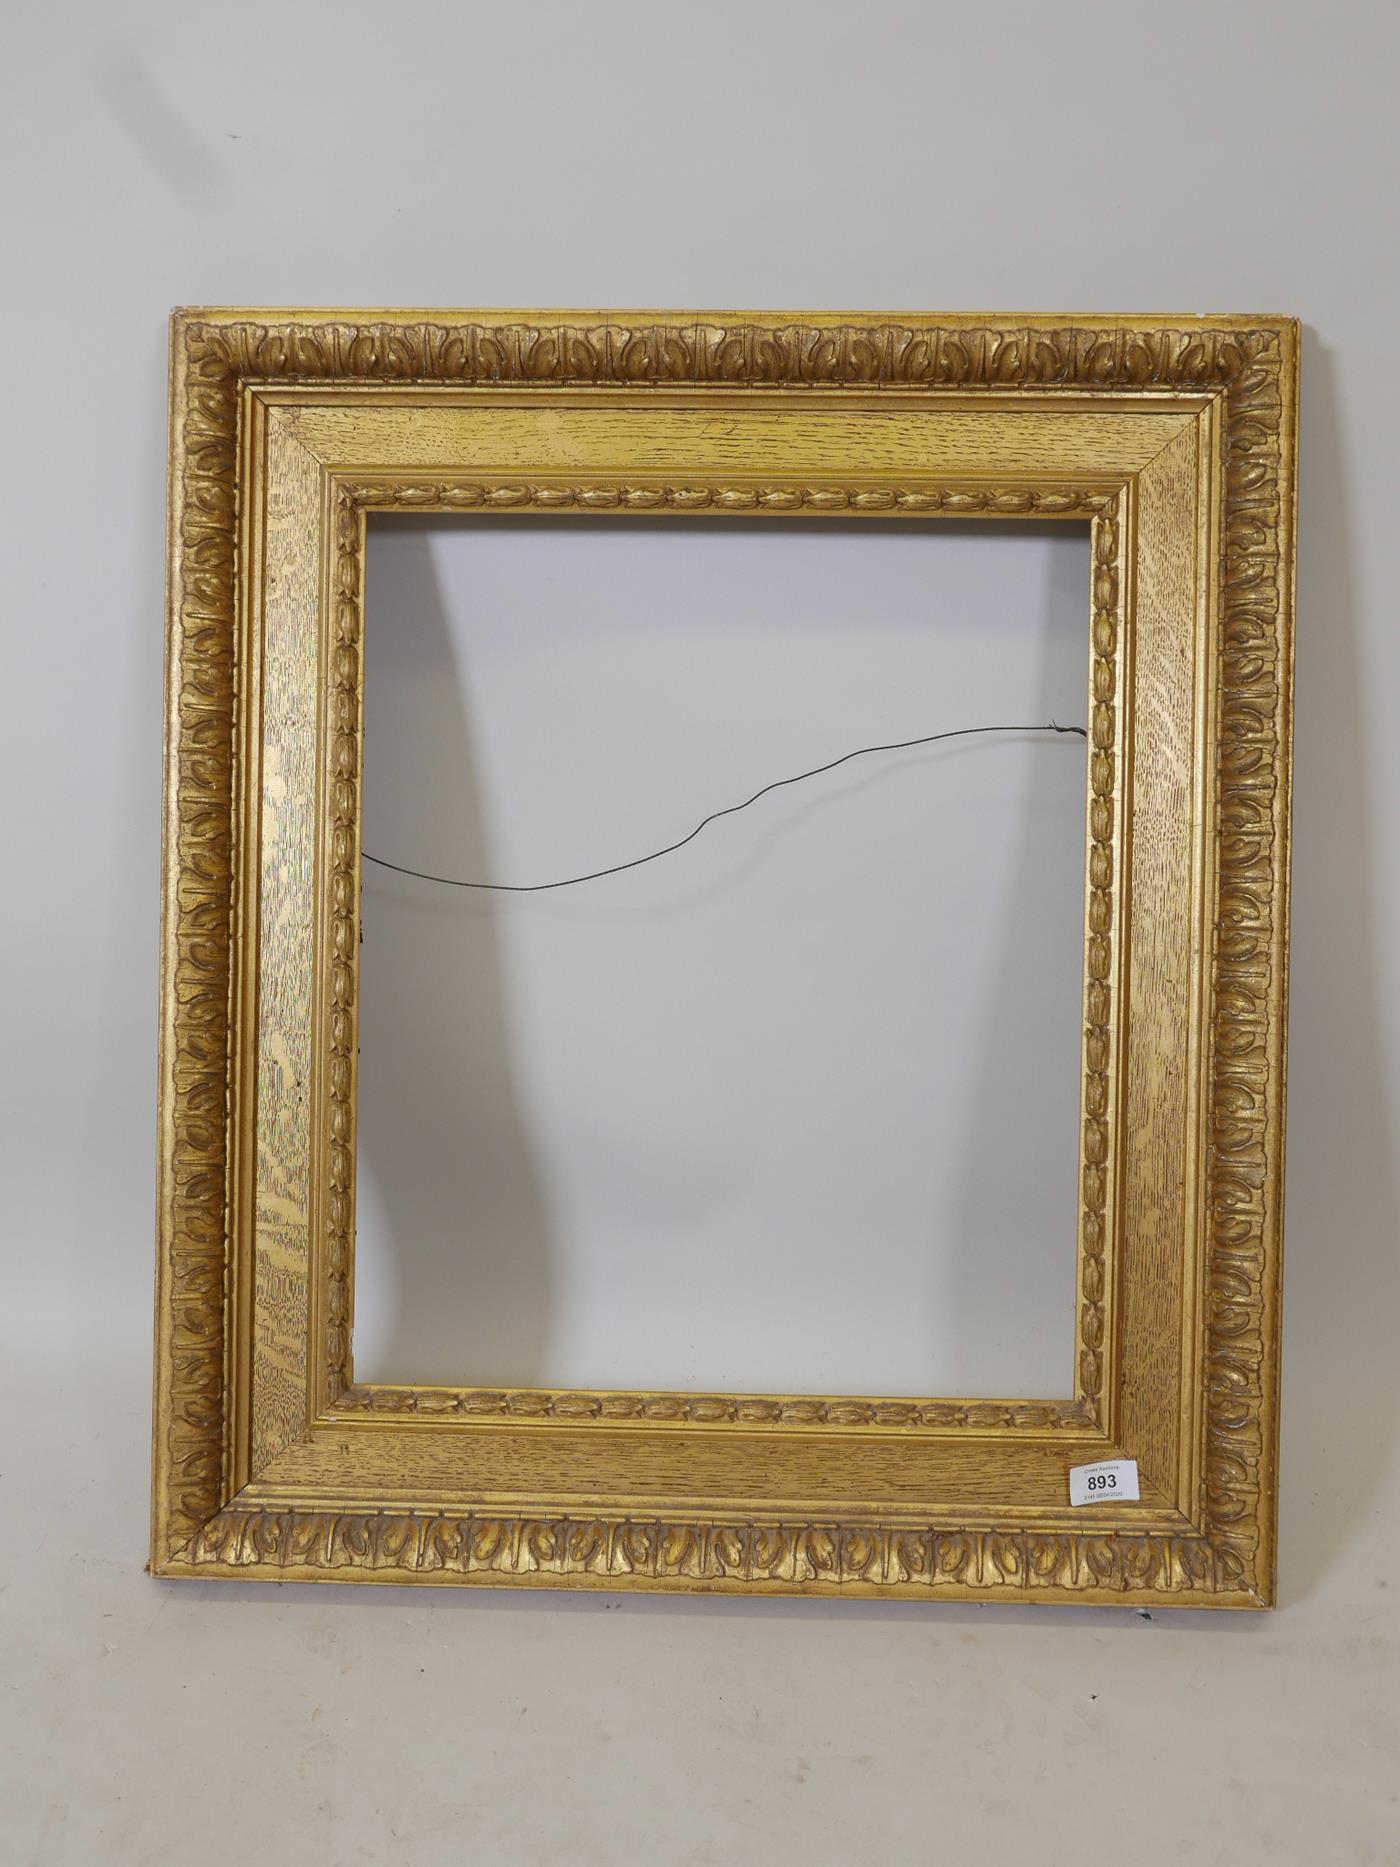 A C19th Watts type giltwood picture frame, rebate 16" x 19"